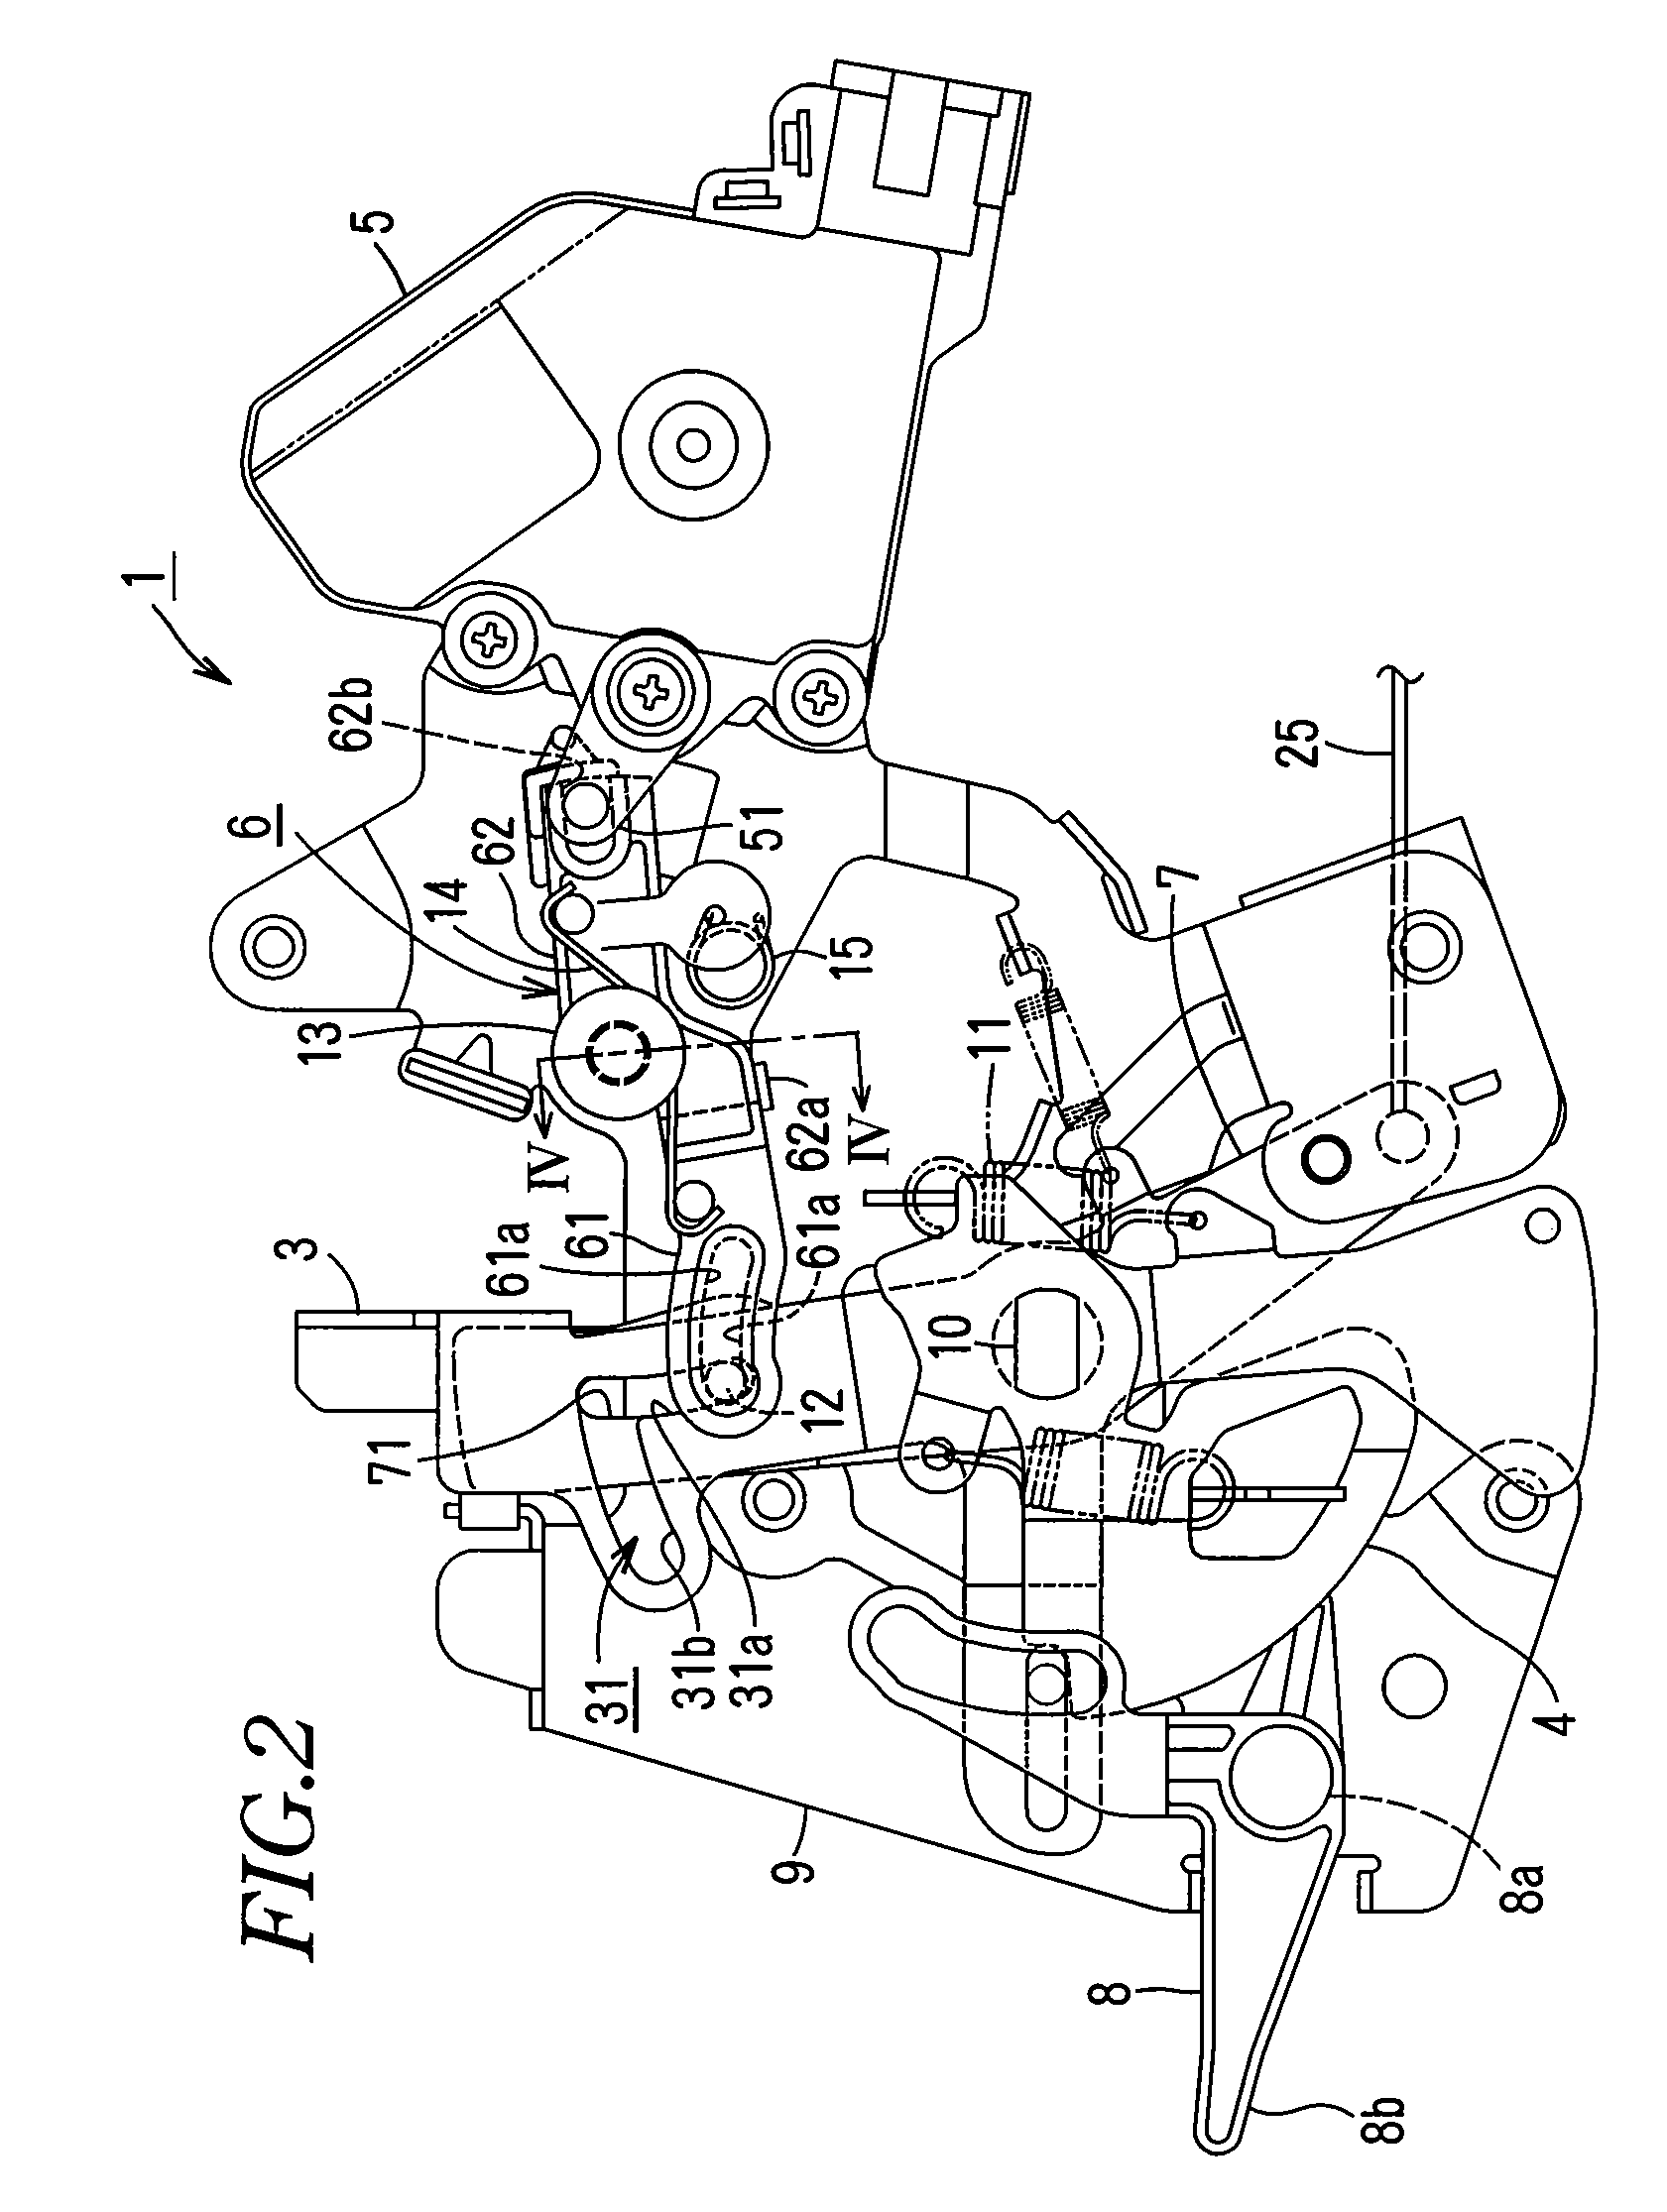 Operating device of a door latch in a vehicle